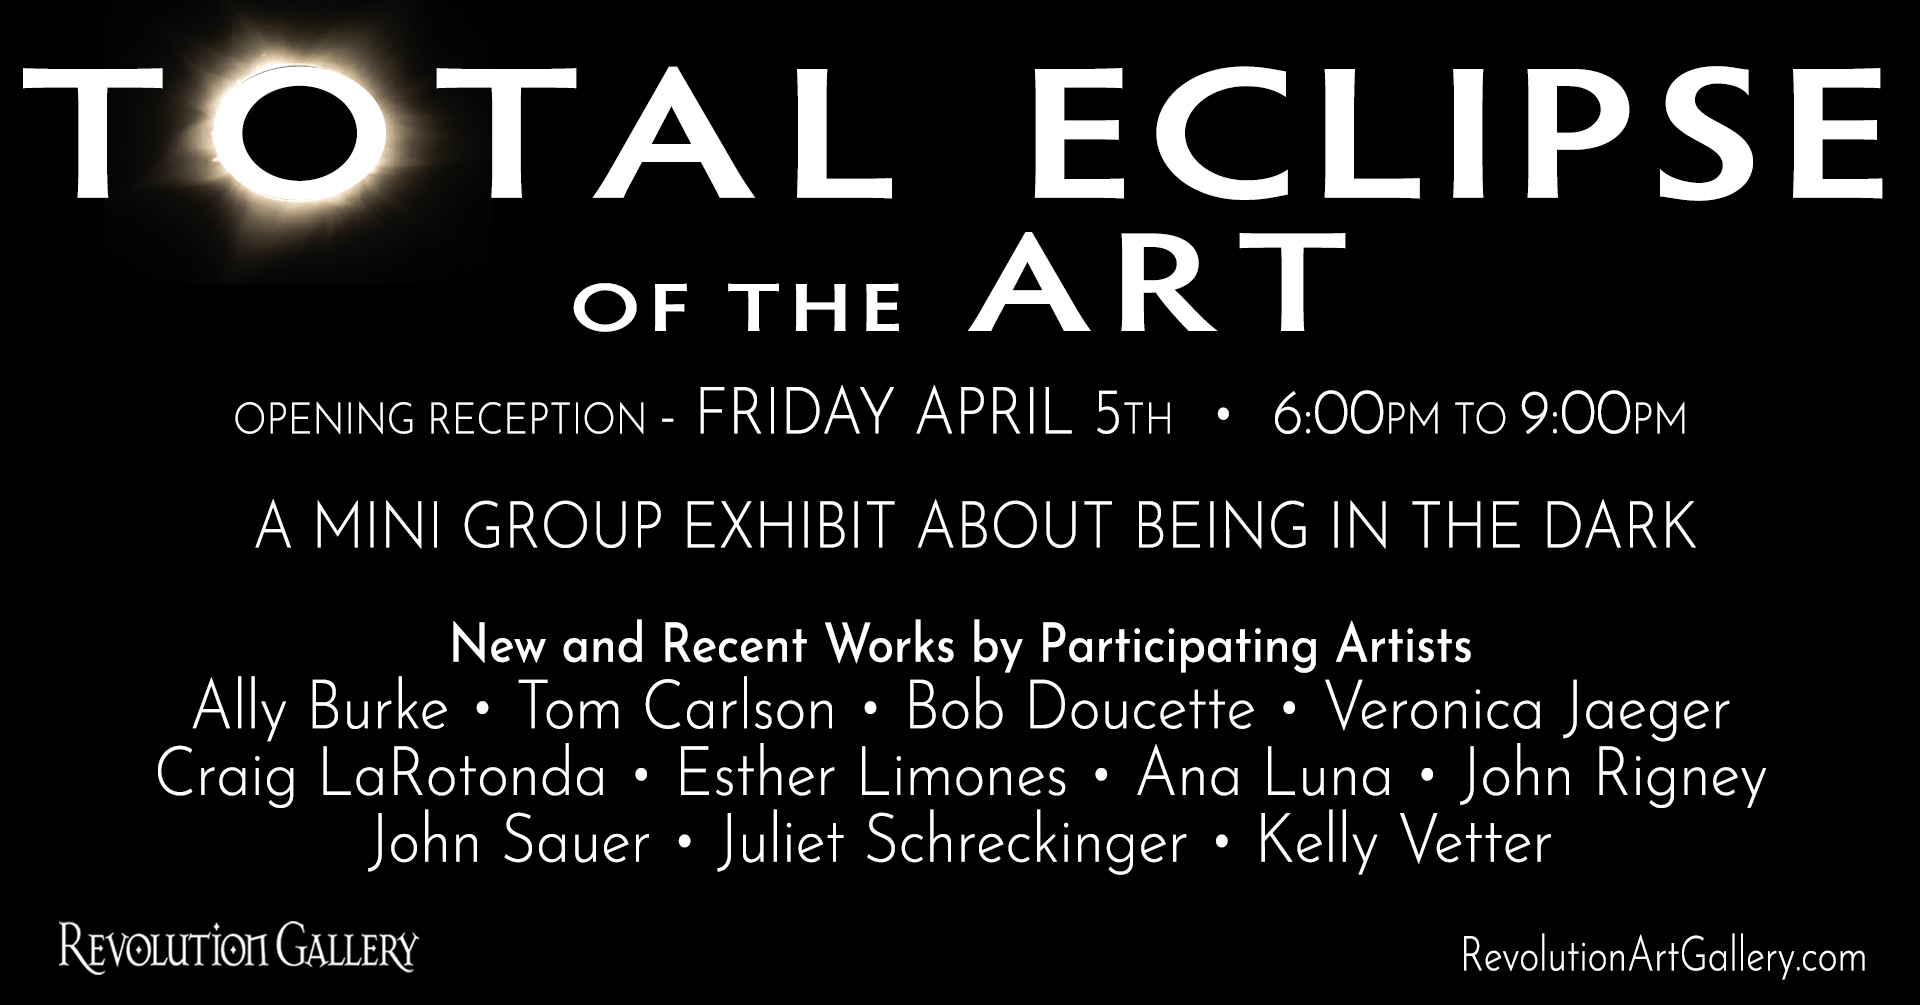 TOTAL_ECLIPSE_OF_THE_ART_FB_BANNER